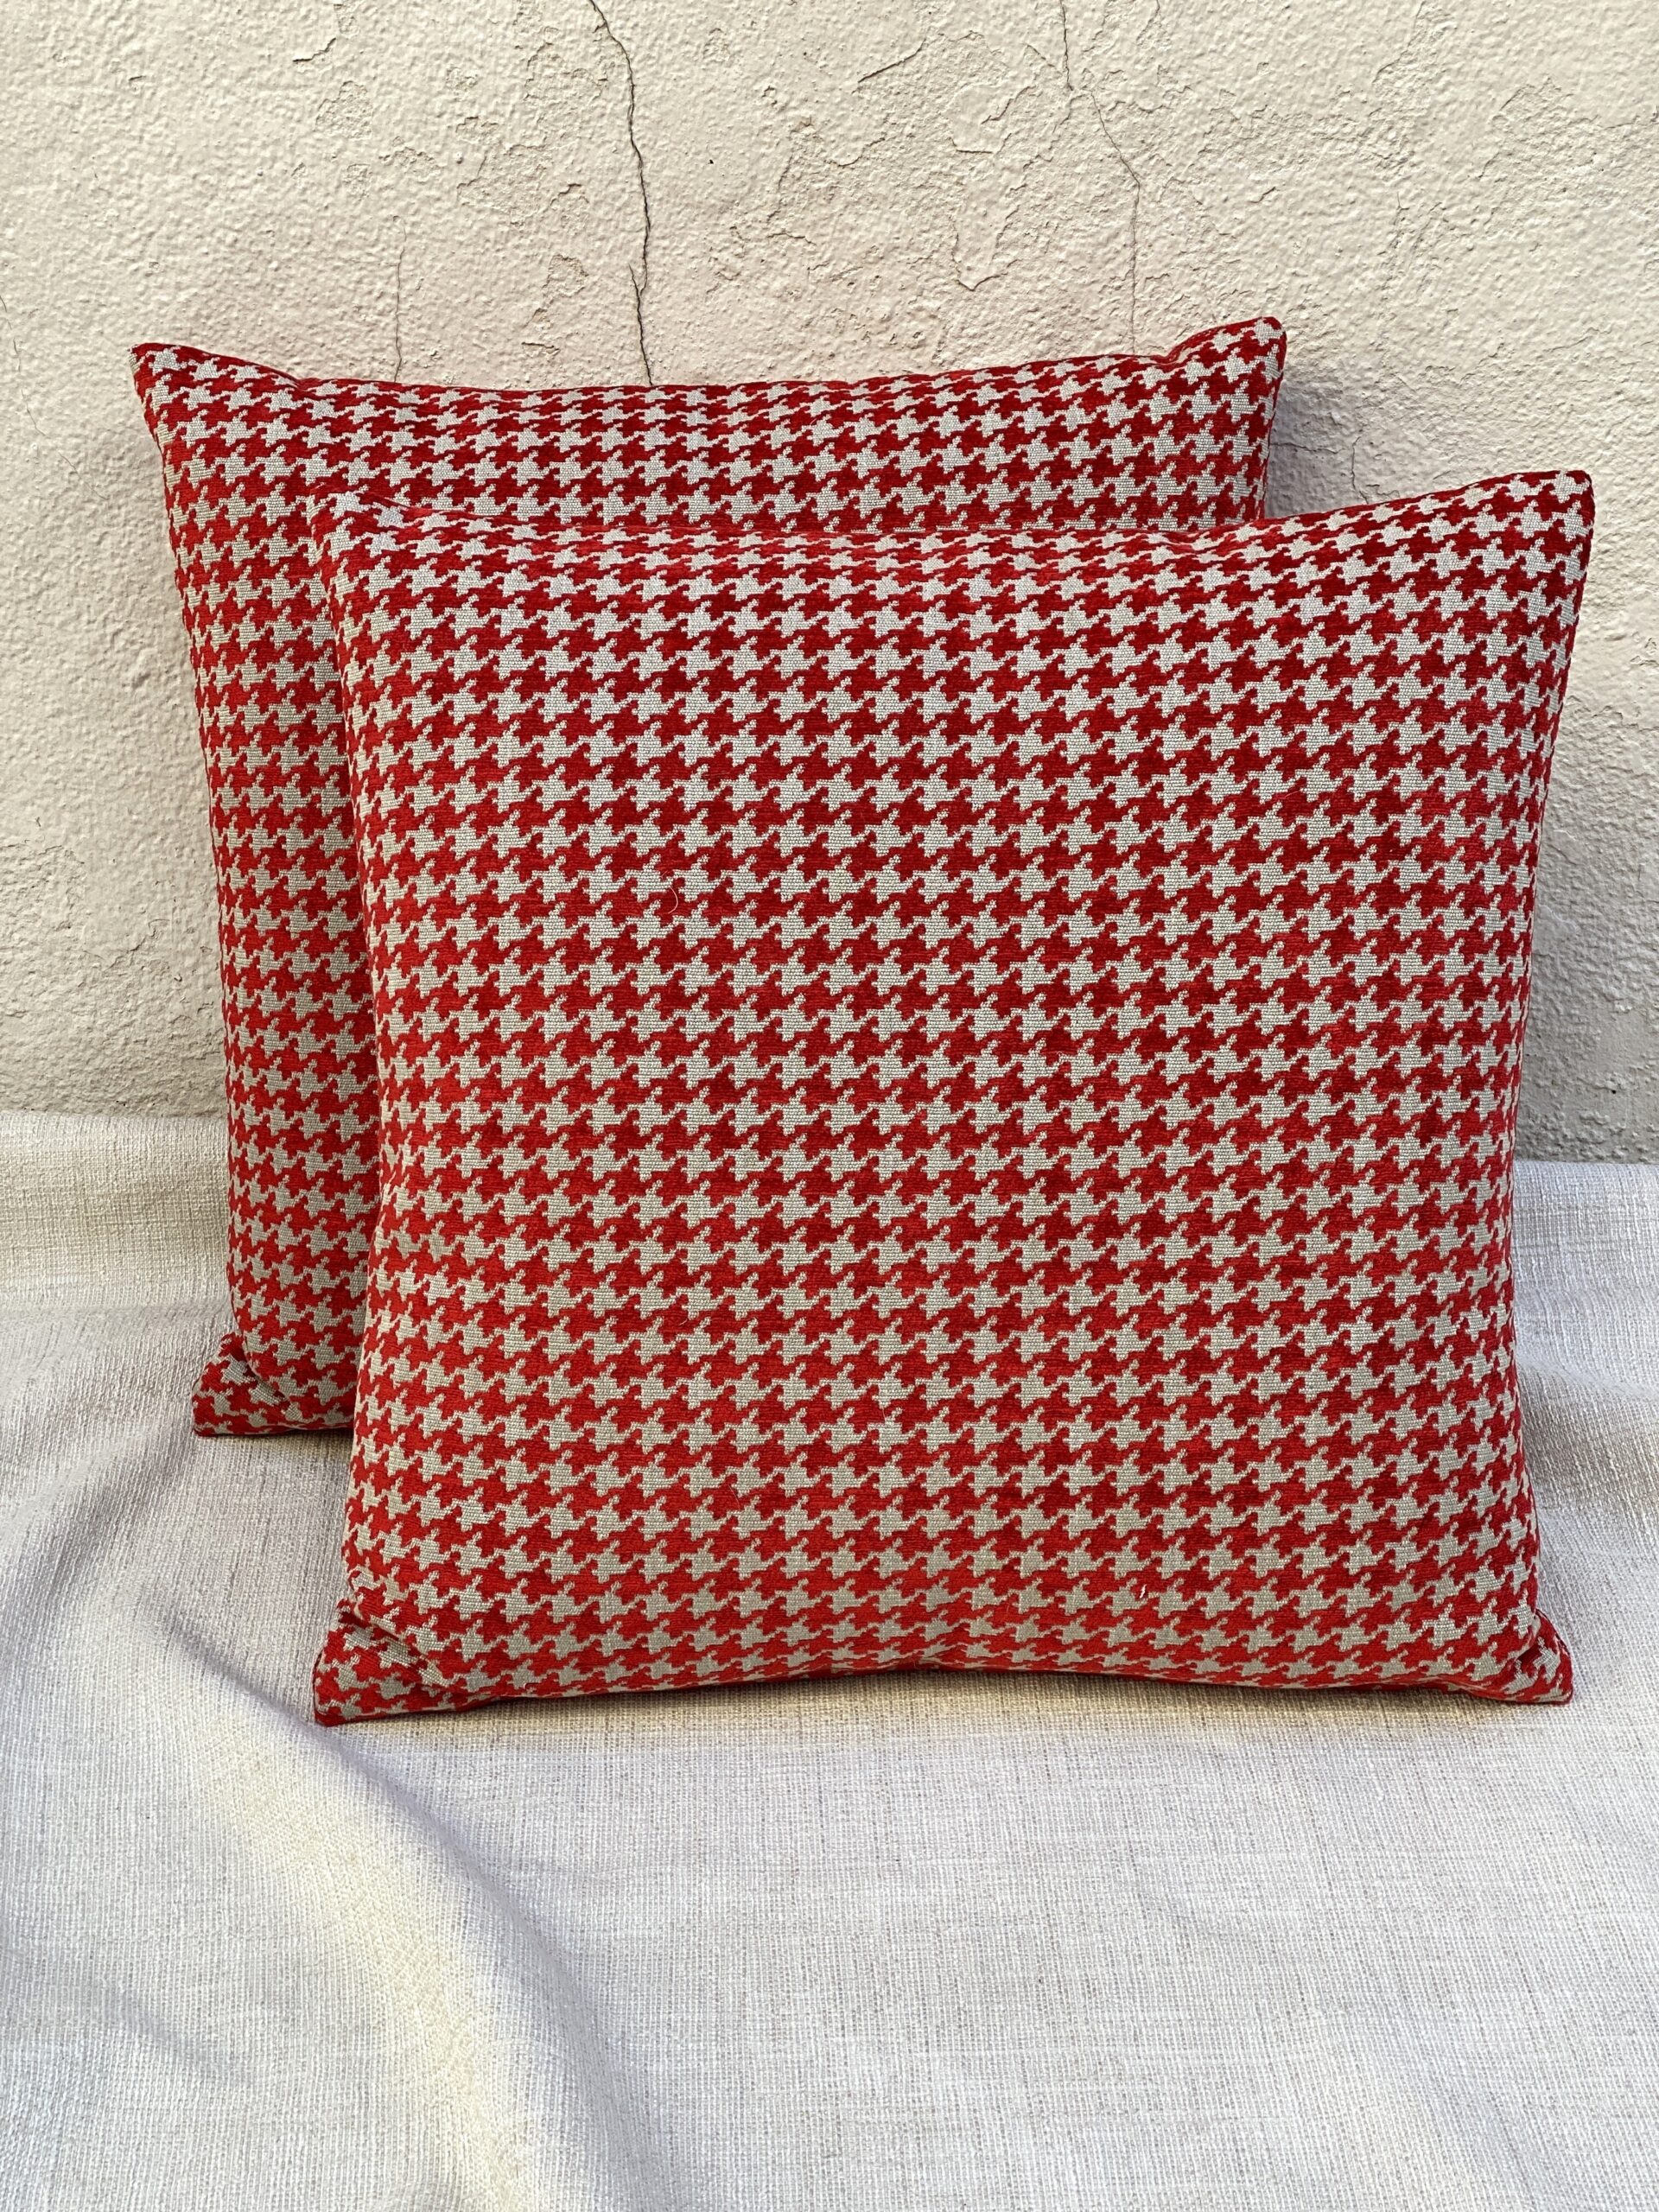 ROMO Tremont Pillows Lacquer Red